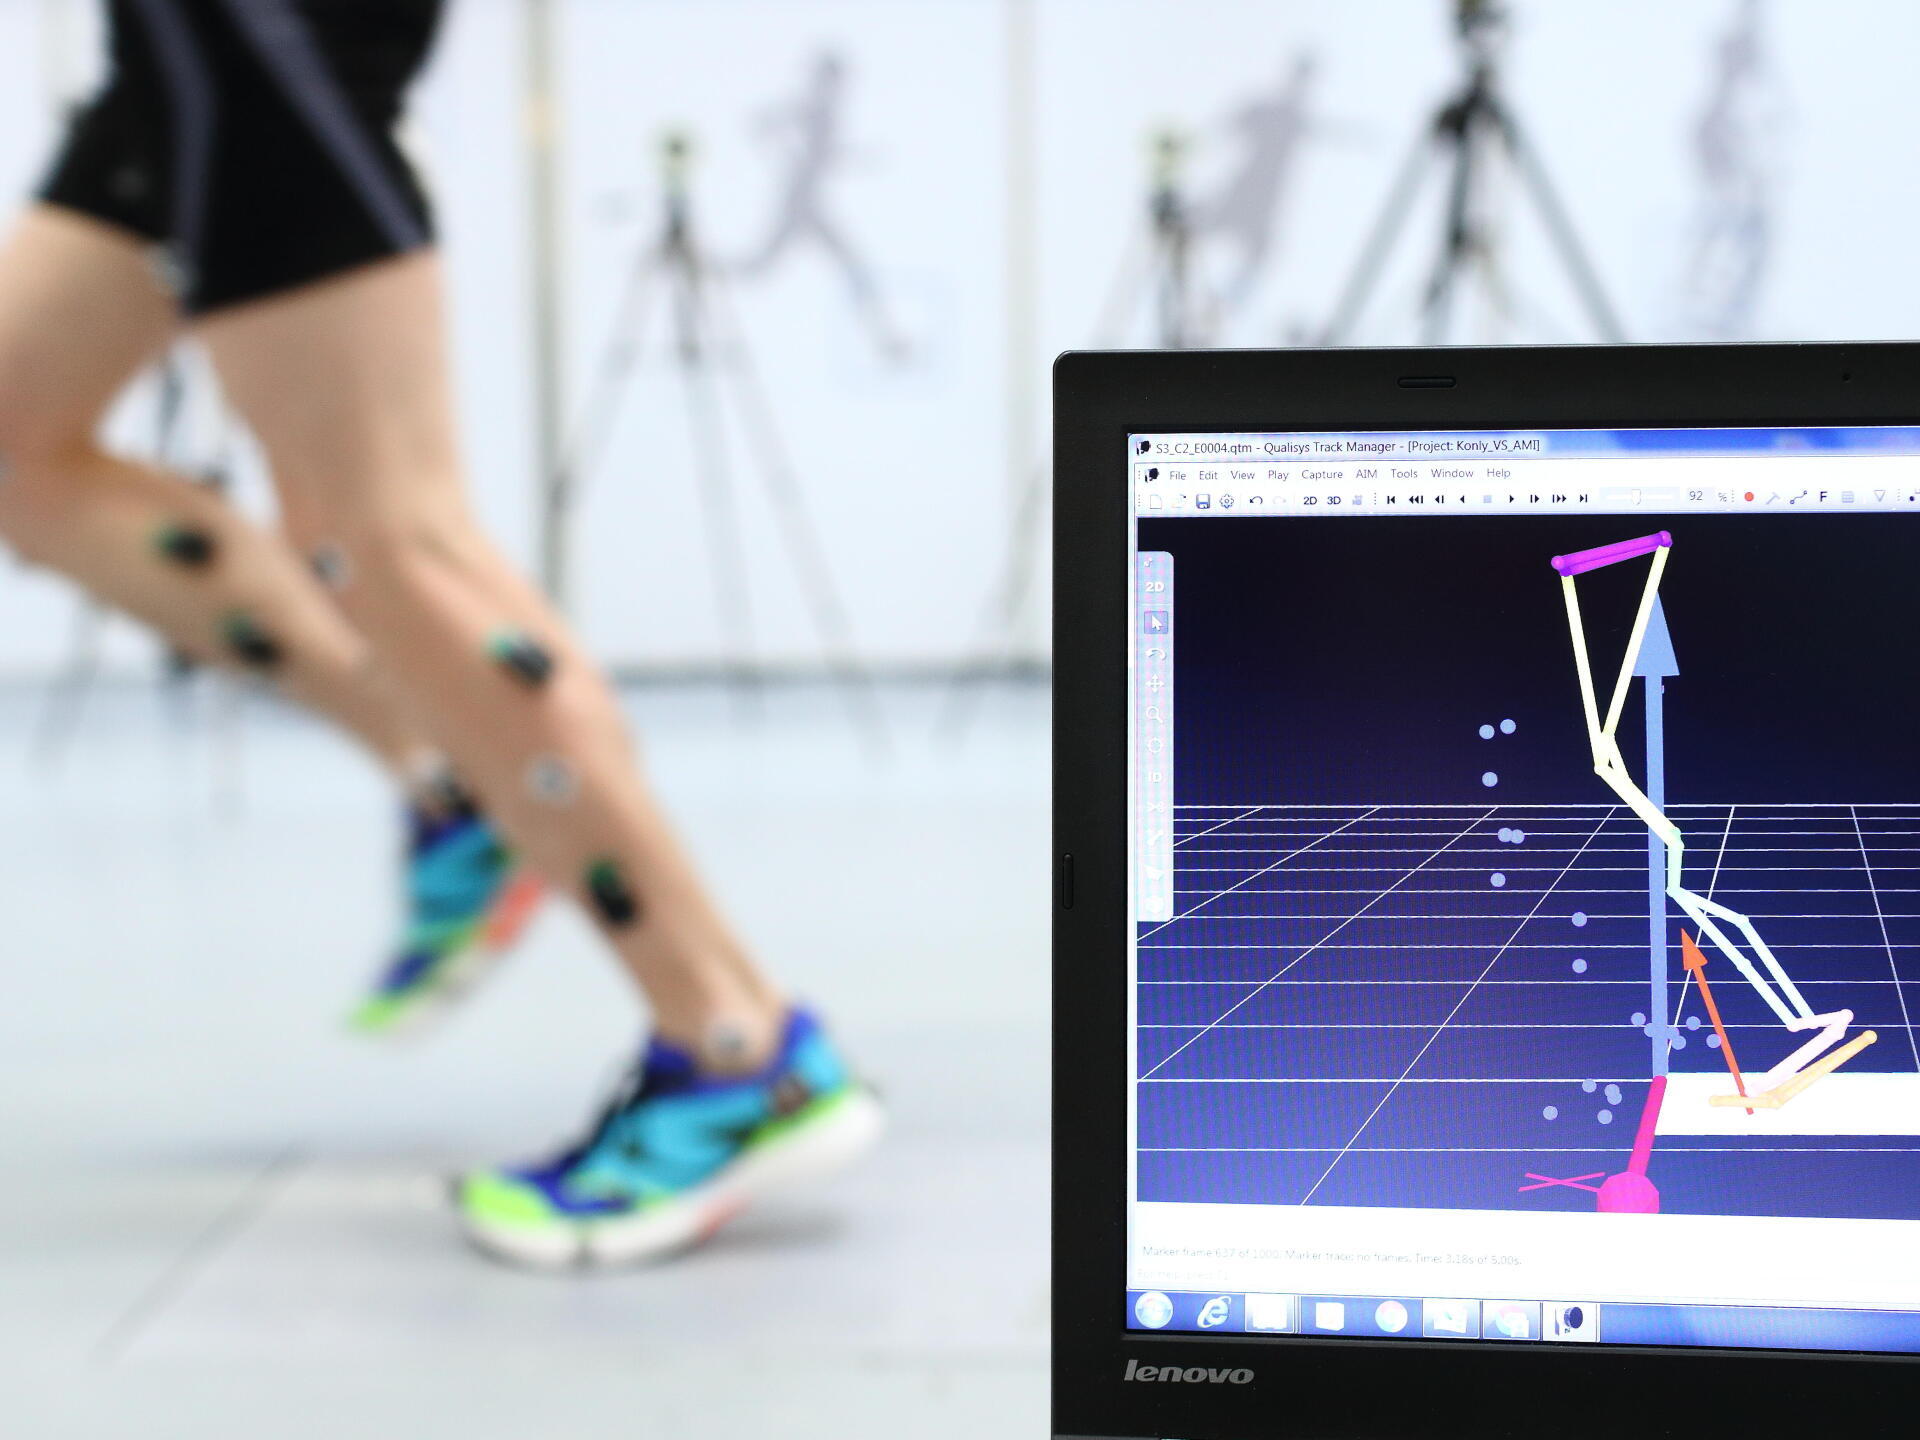 THE SPORTSLAB: OUR LAB ANALYSING THE SPORTSWOMEN AND MEN'S BODY